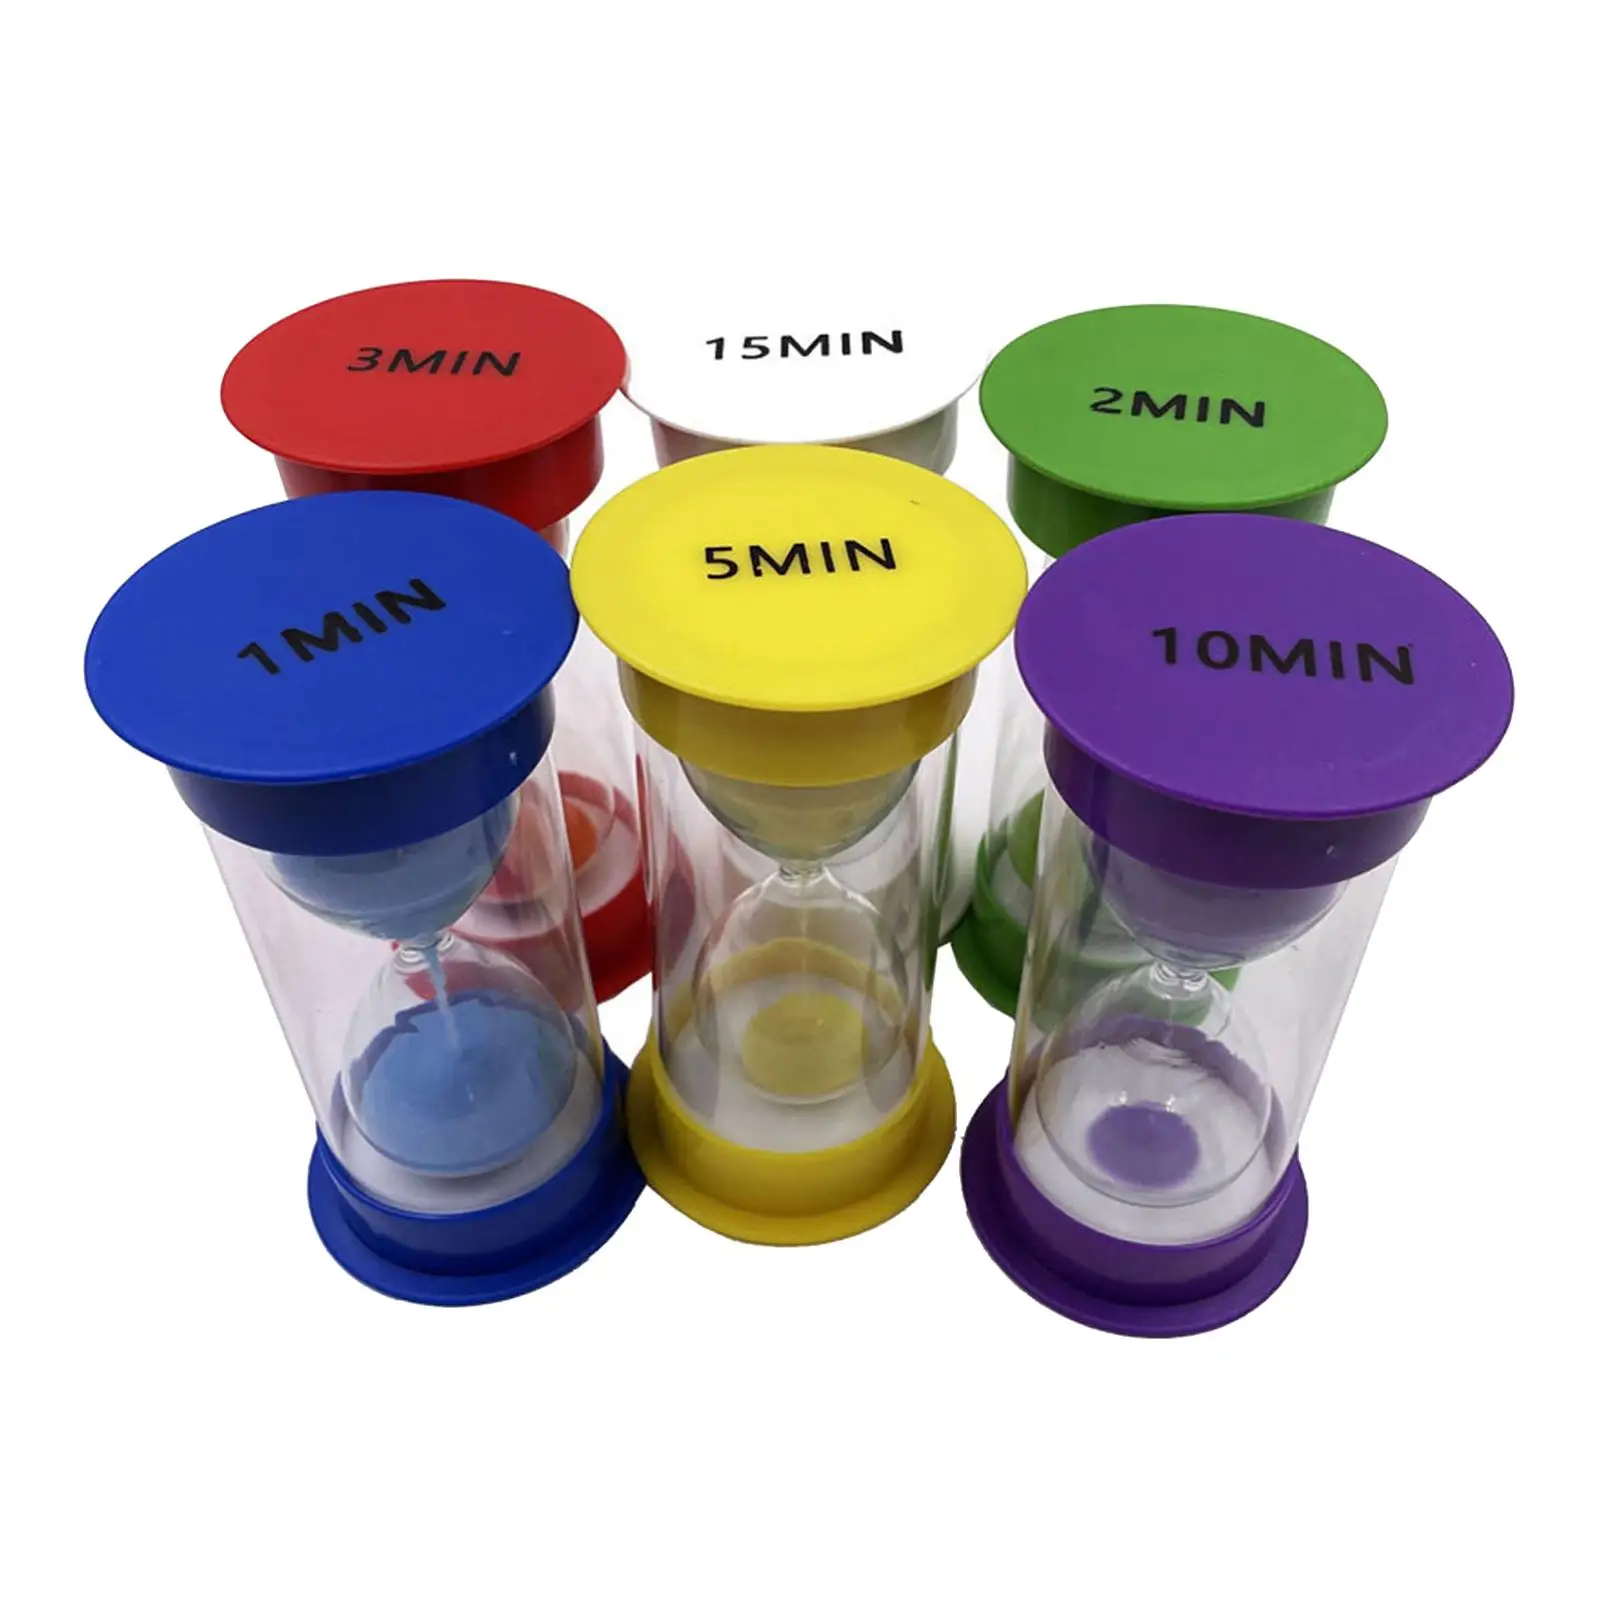 6x Sandglass Timer Colorful Portable Visual Sand Clock Timer Sand Hourglass Timer for Room Reading Restaurant Cooking